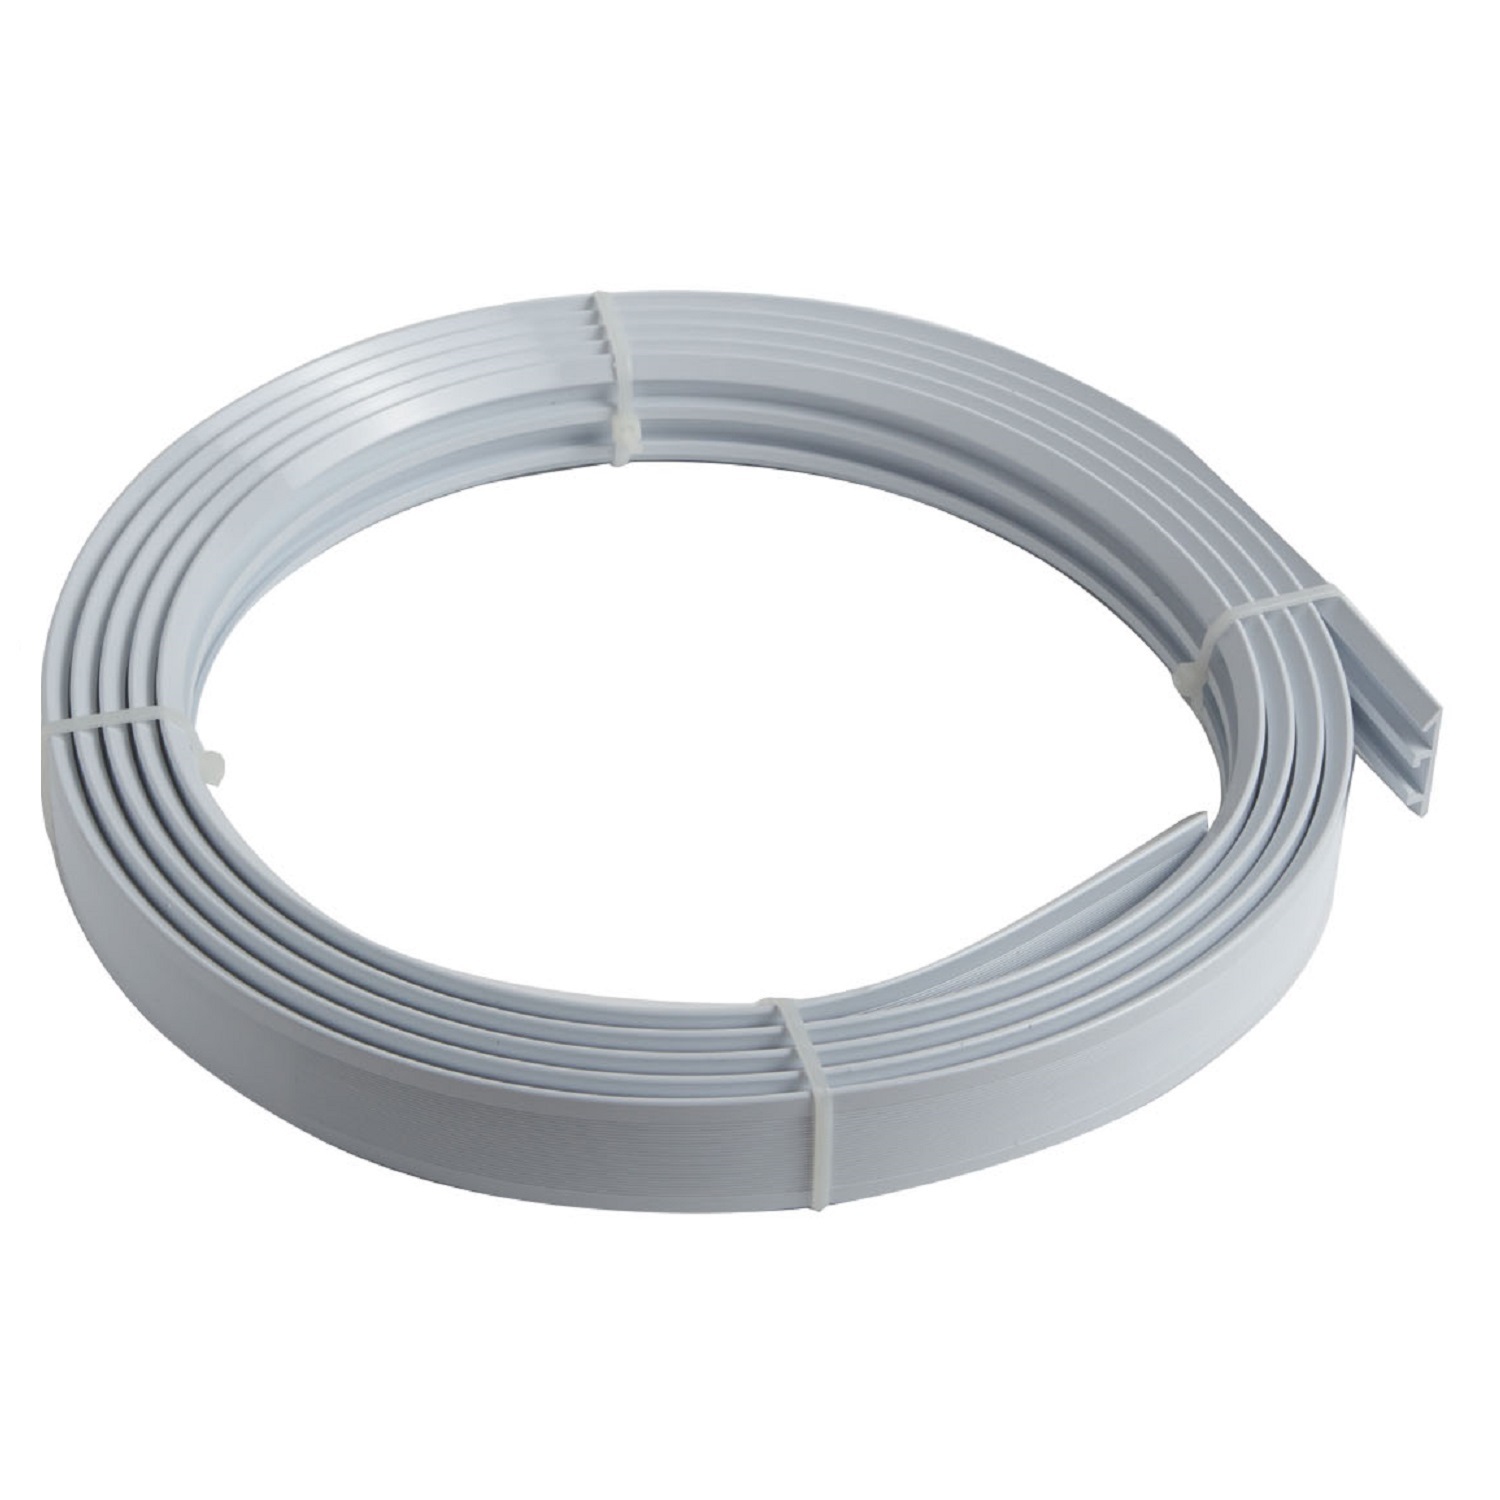 Simply Coiled Pvc Track White Wilko